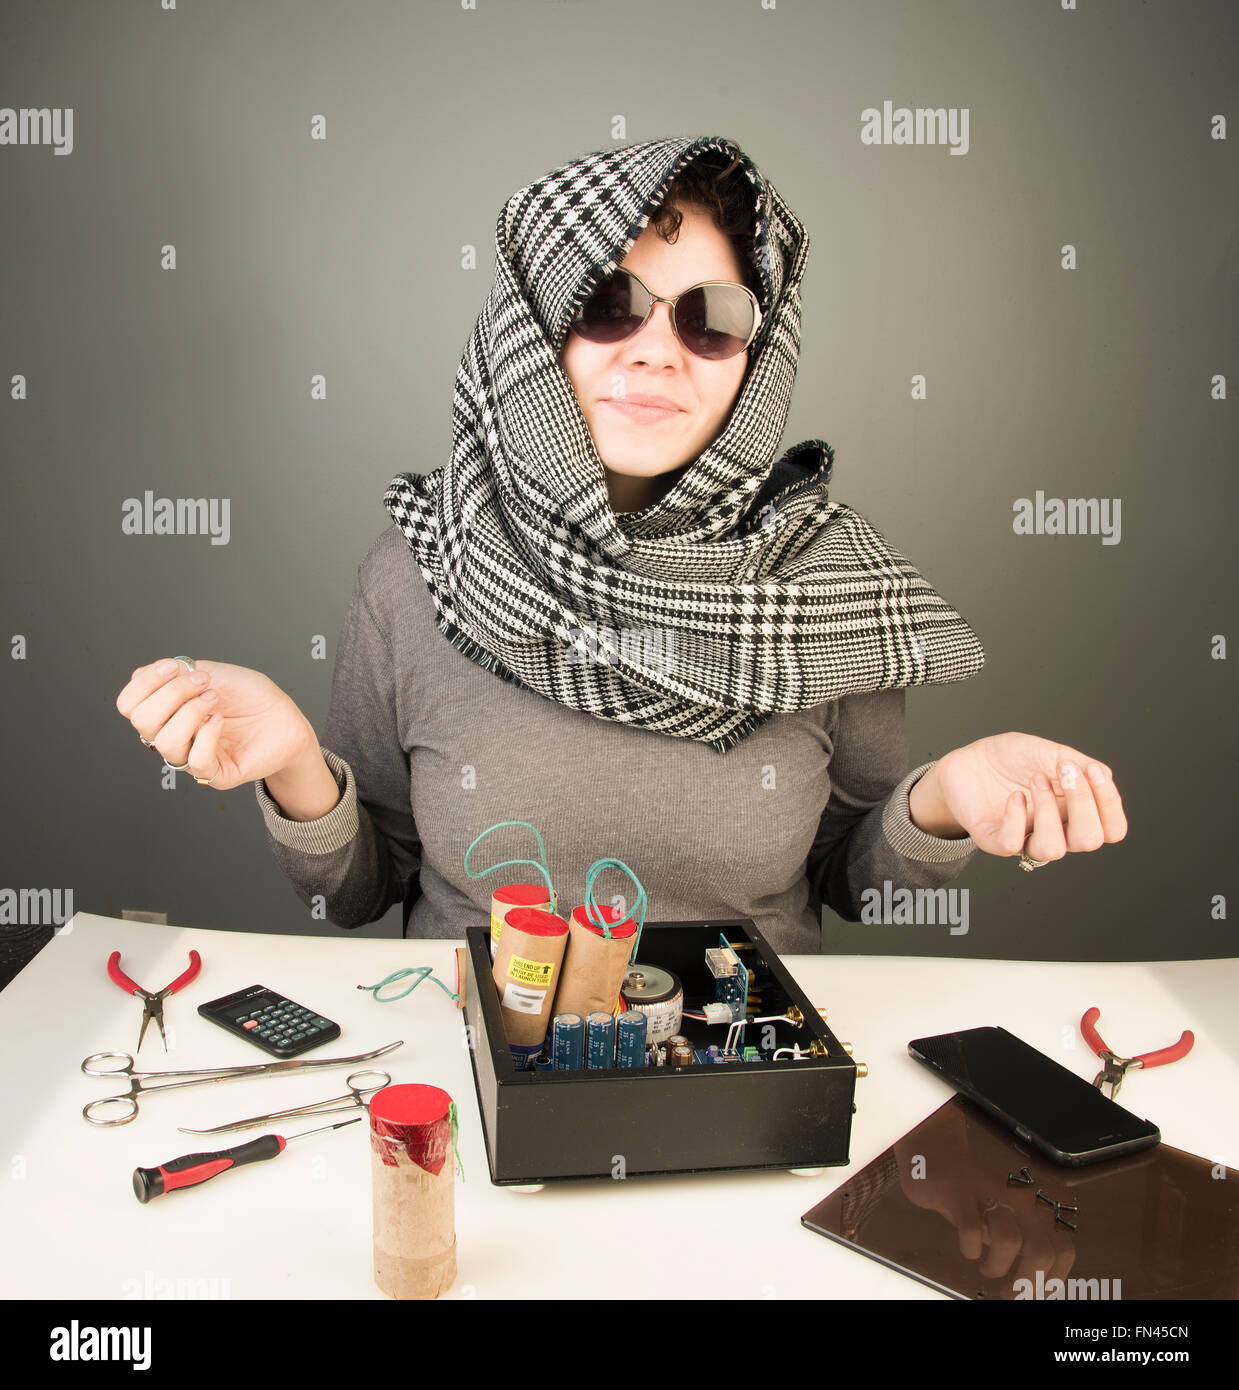 Danger Femme/Pretty stylish Caucasian woman wearing houndstooth headscarf sitting at table with components and explosives Stock Photo